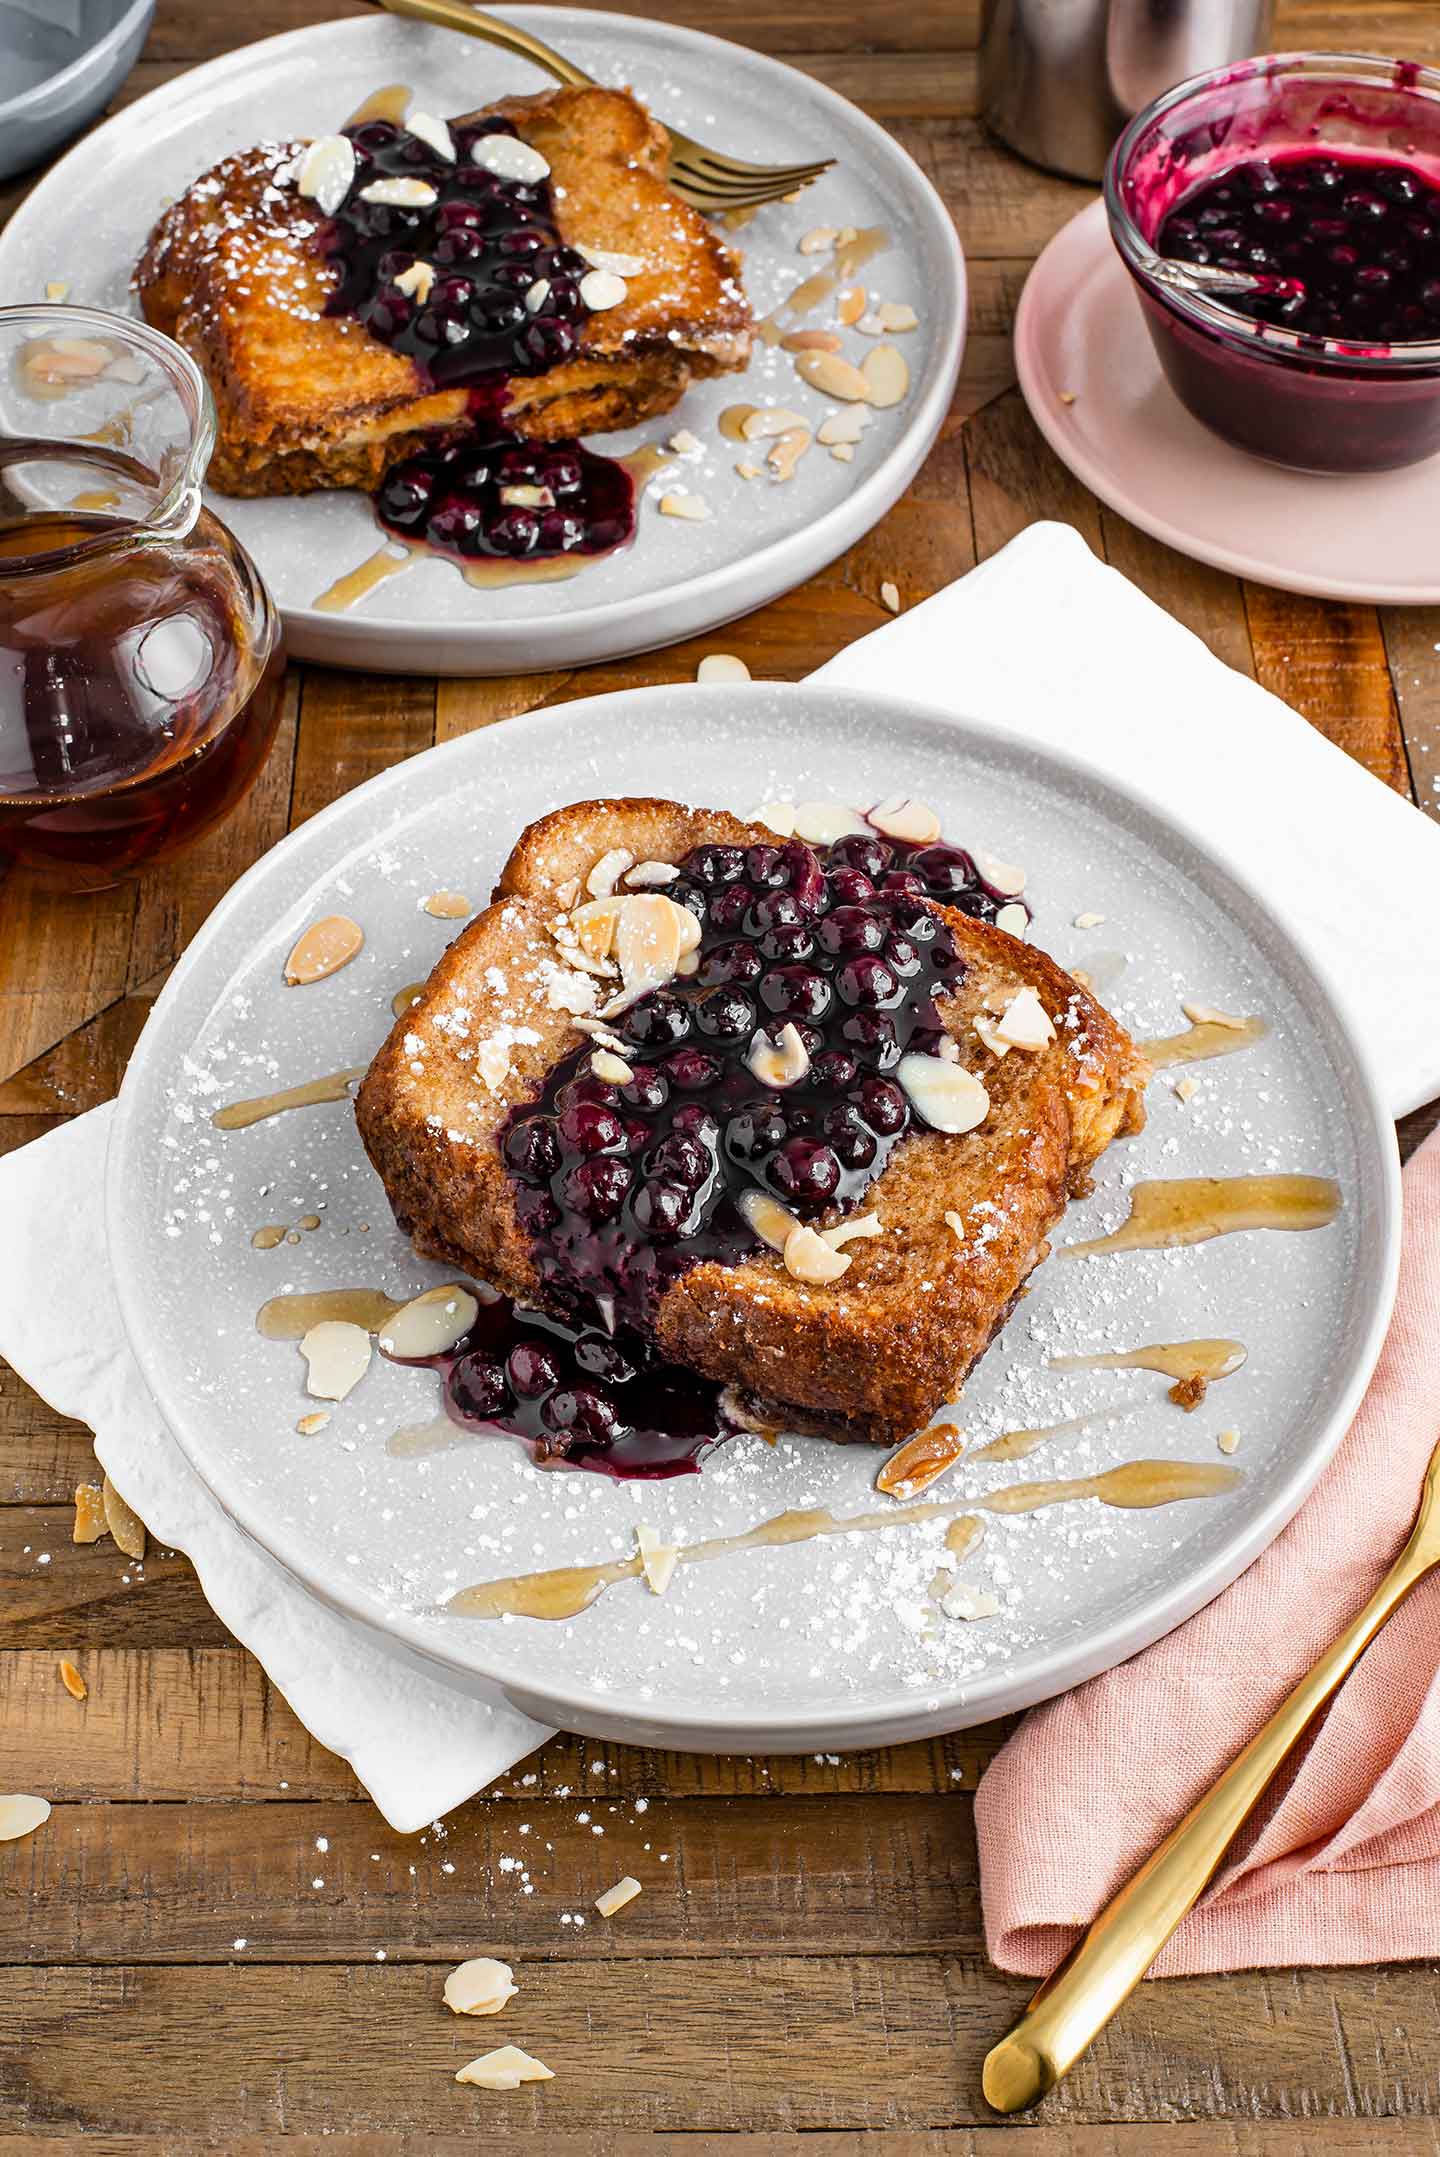 Top down view of two plates of vegan french toast casserole topped with blueberry sauce, maple syrup, toasted almonds, and powdered sugar.